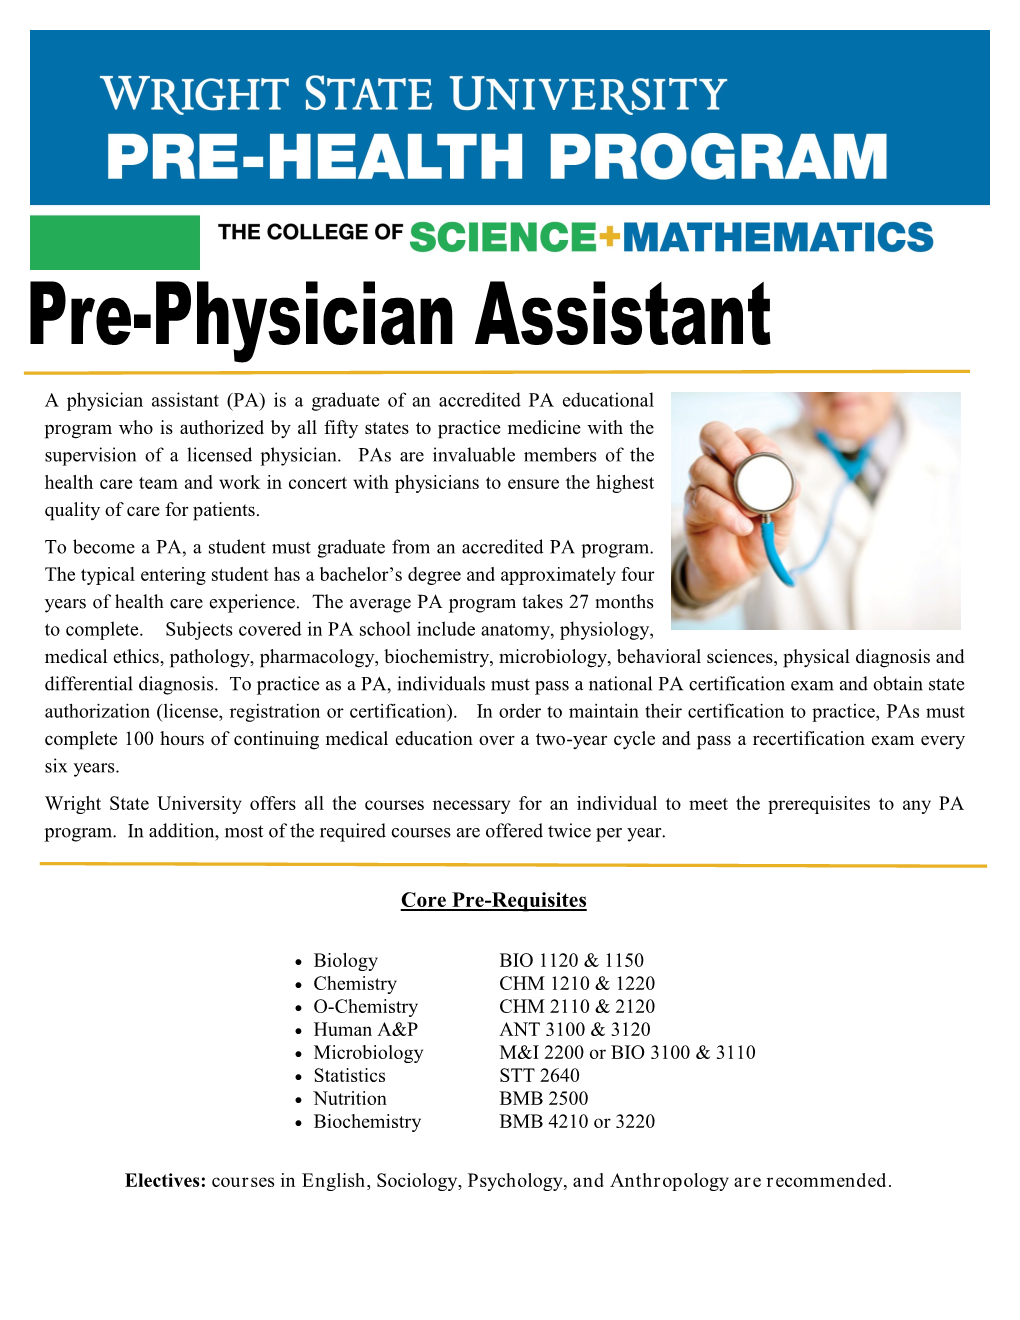 A Physician Assistant (PA) Is a Graduate of an Accredited PA Educational